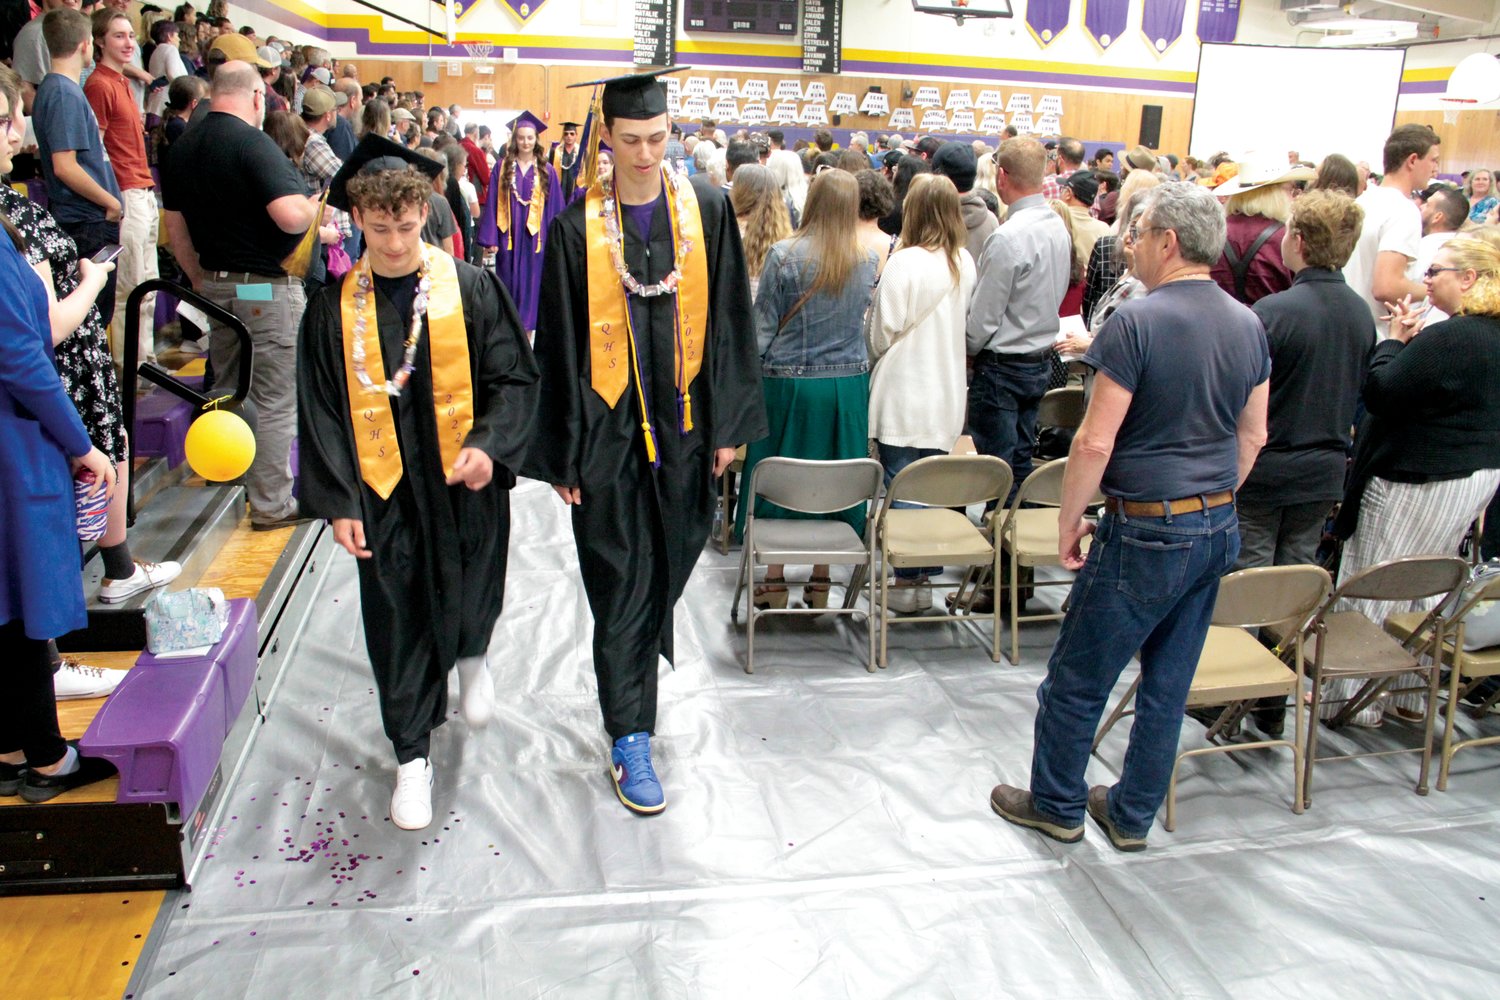 Kevin Alejo and Nathan Kieffer walk through the gymnasium during the procession at Quilcene’s graduation ceremony Saturday.